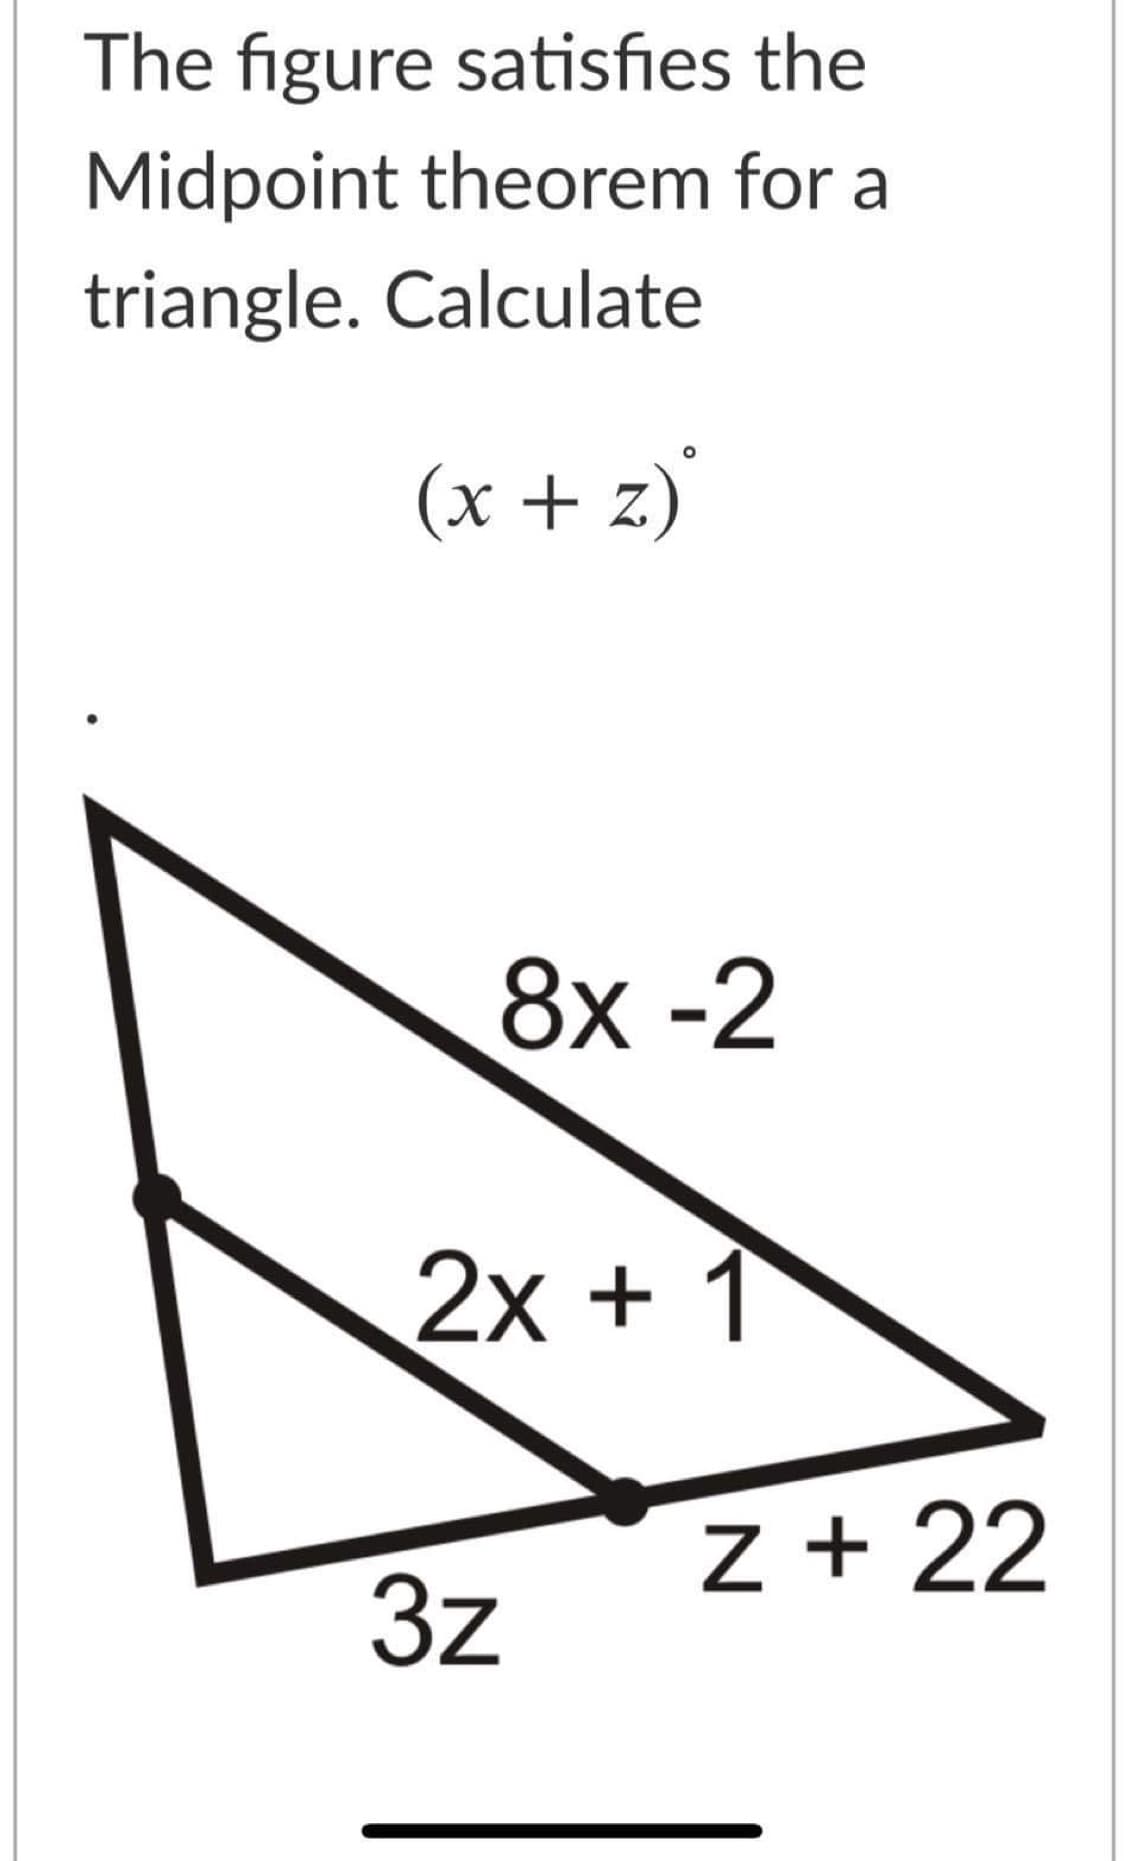 The figure satisfies the
Midpoint theorem for a
triangle. Calculate
(x + z)'
8х -2
2x + 1
z + 22
3z
